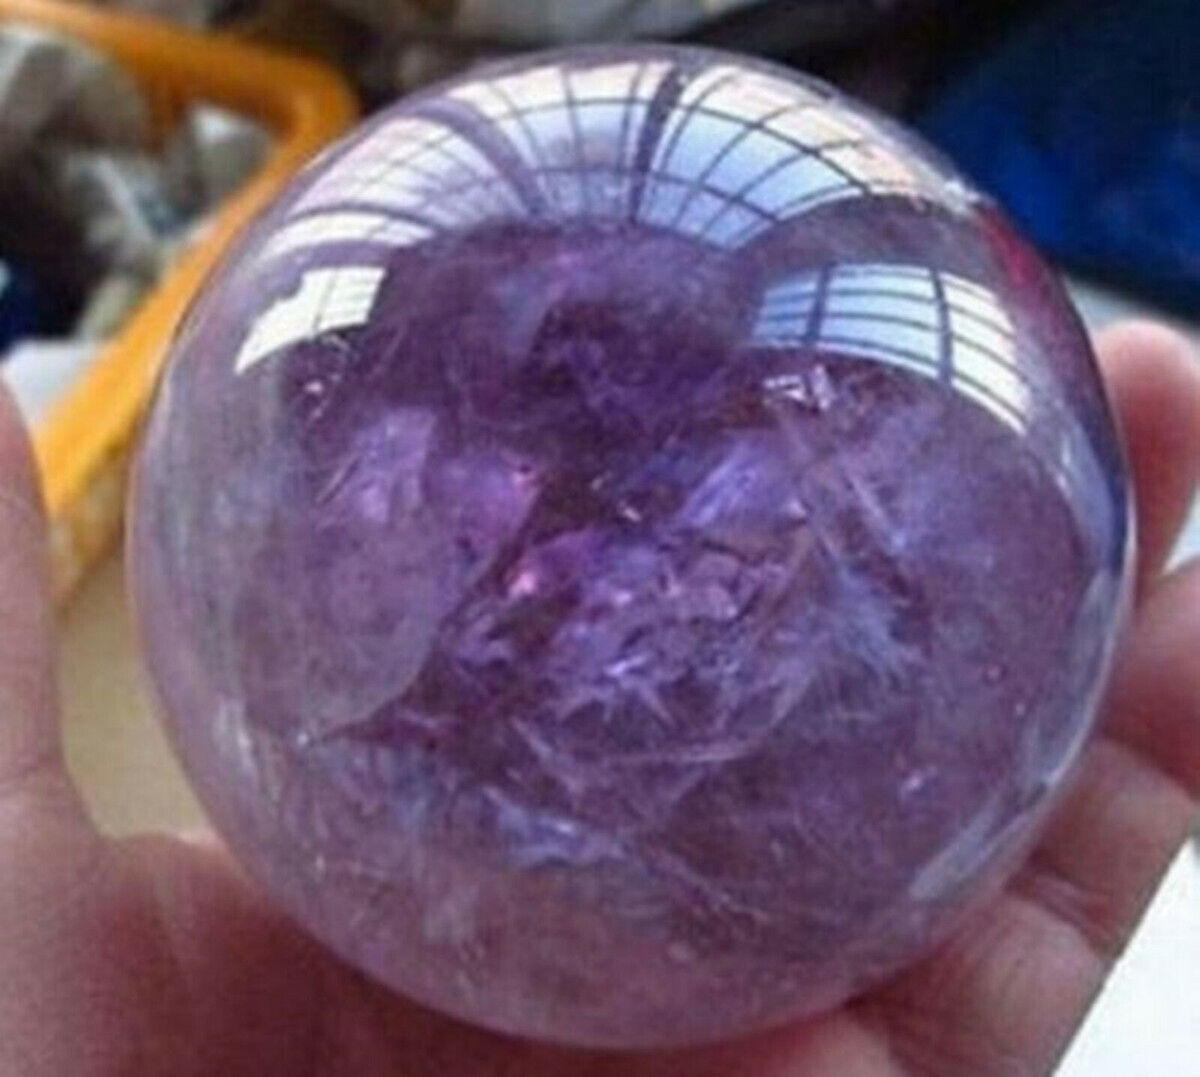 AAA+ NEW Natural Amethyst Quartz Crystal Sphere Ball Healing Stone 40mm + Stand